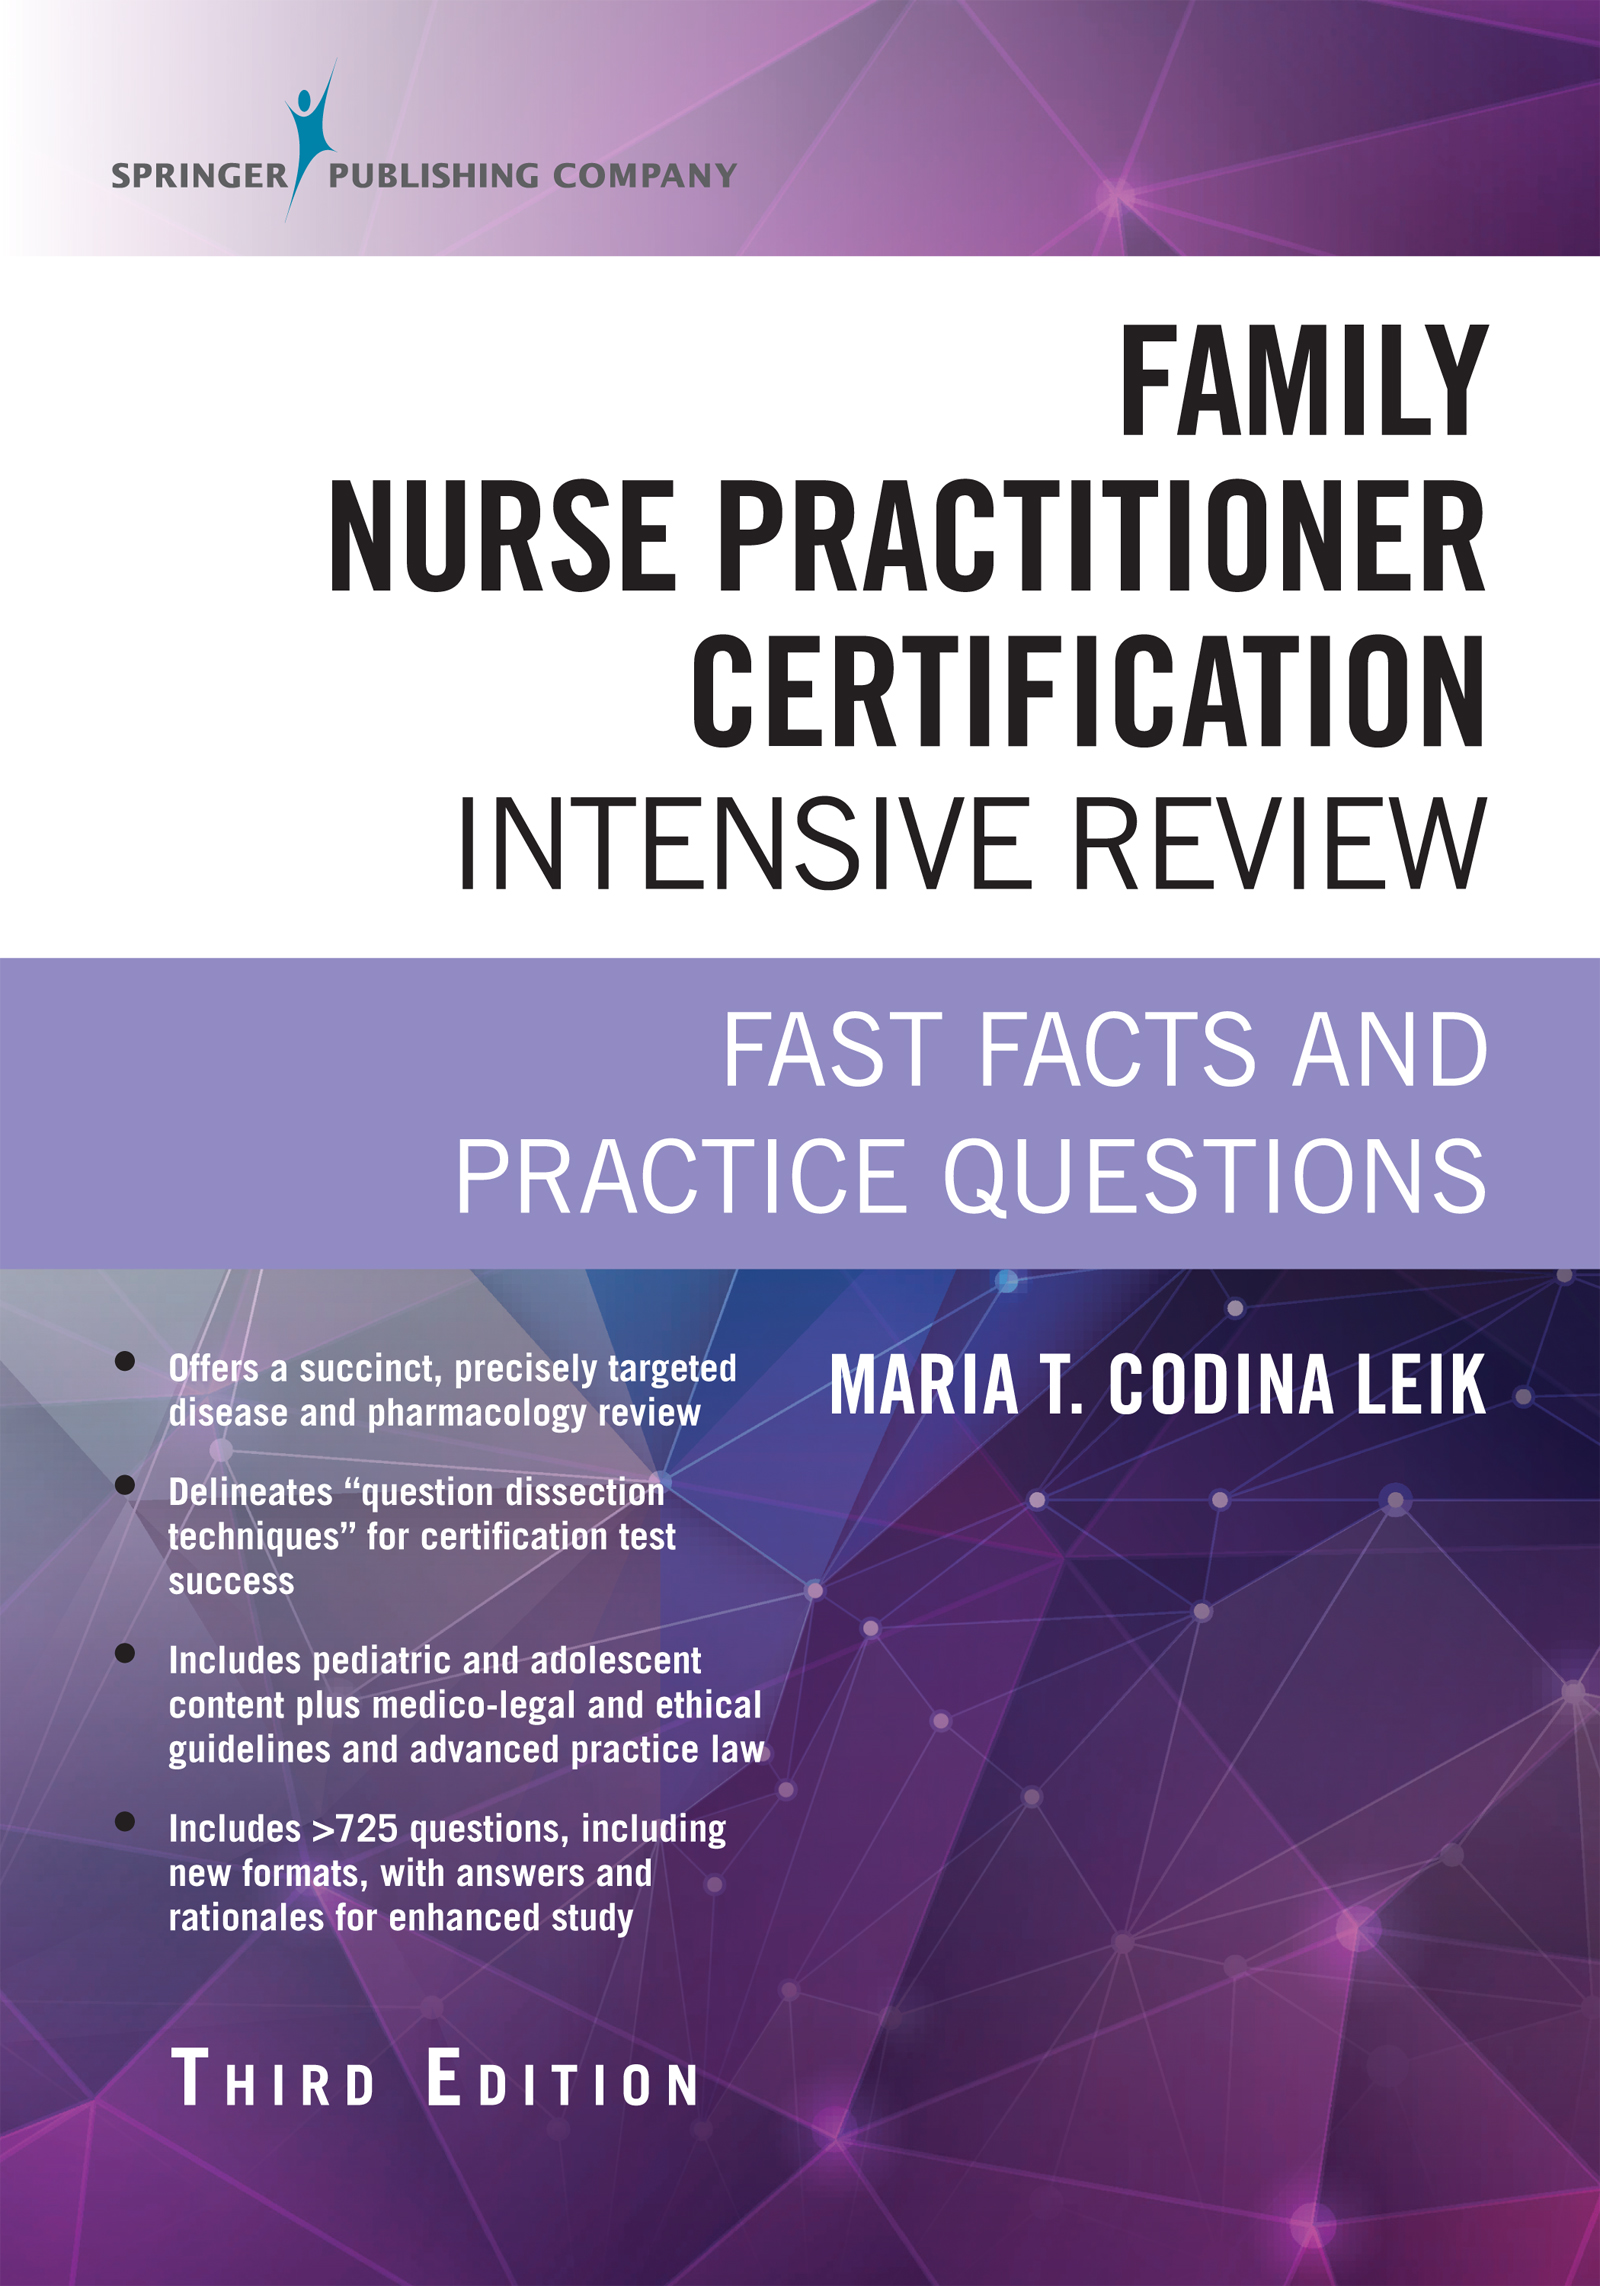 Family Nurse Practitioner Certification Intensive Review, Third Edition